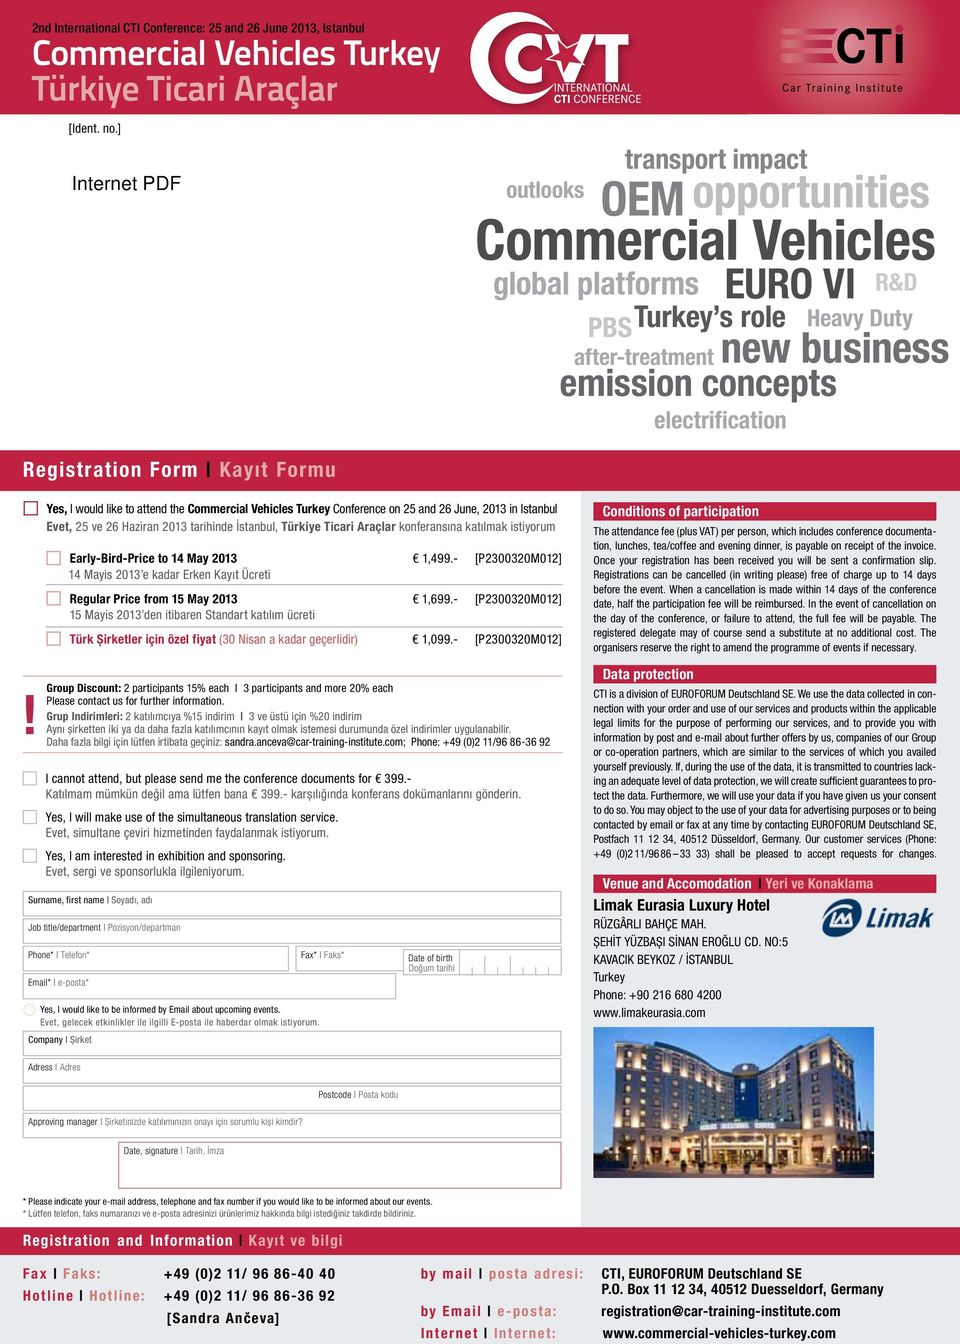 Form Kayıt Formu Yes, I would like to attend the Commercial Vehicles Turkey Conference on 25 and 26 June, 2013 in Istanbul Evet, 25 ve 26 Haziran 2013 tarihinde İstanbul, Türkiye Ticari Araçlar